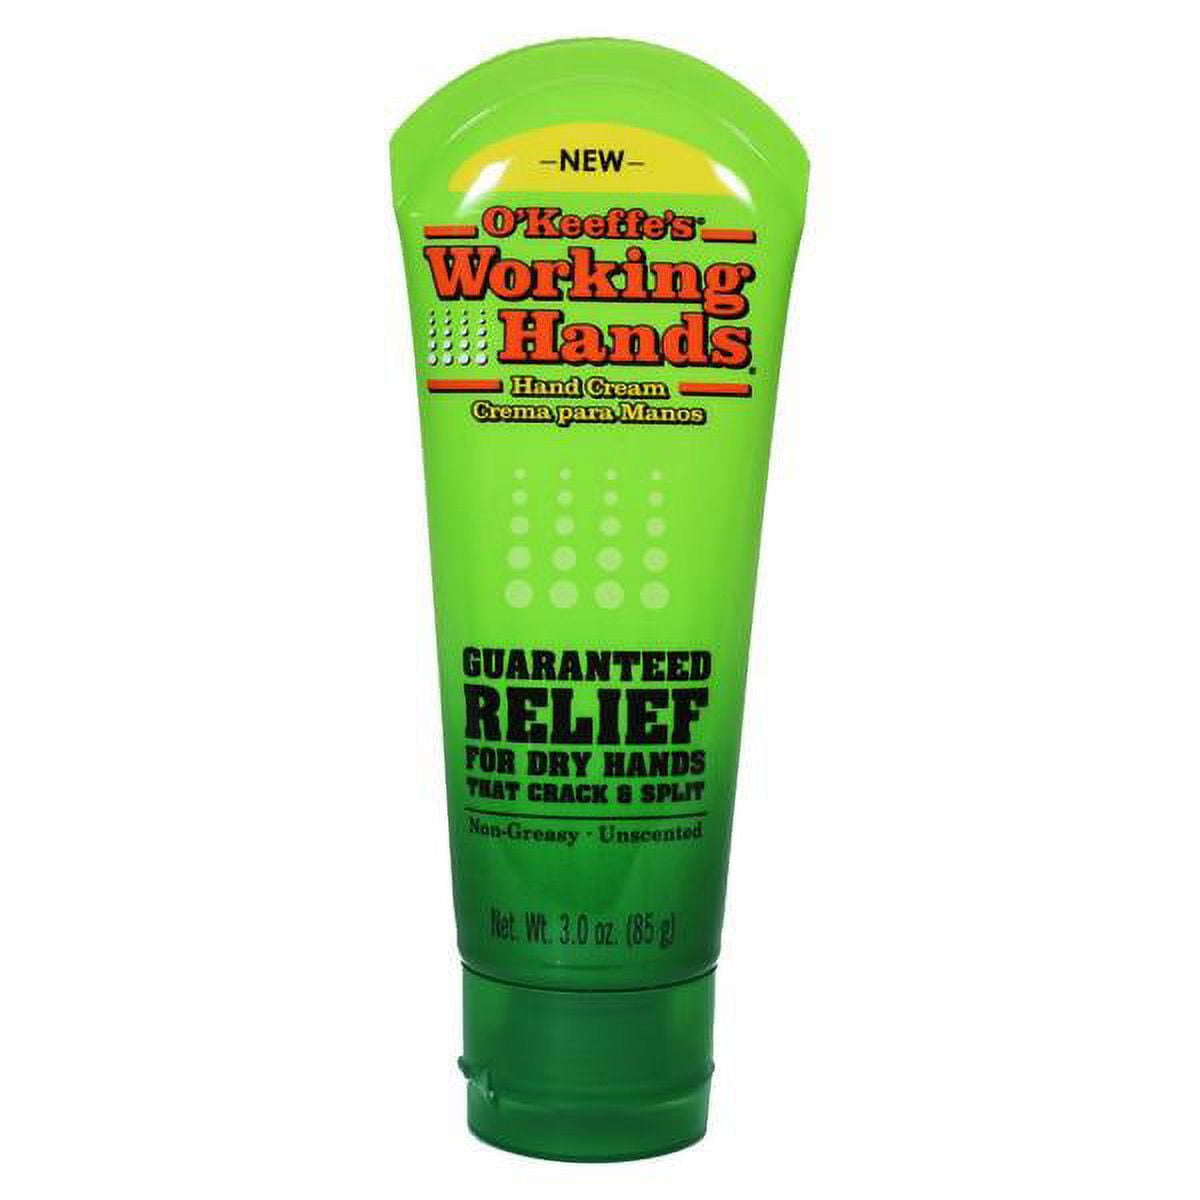 O'Keeffe's Working Hands Hand Cream # The Beer Review Guy 